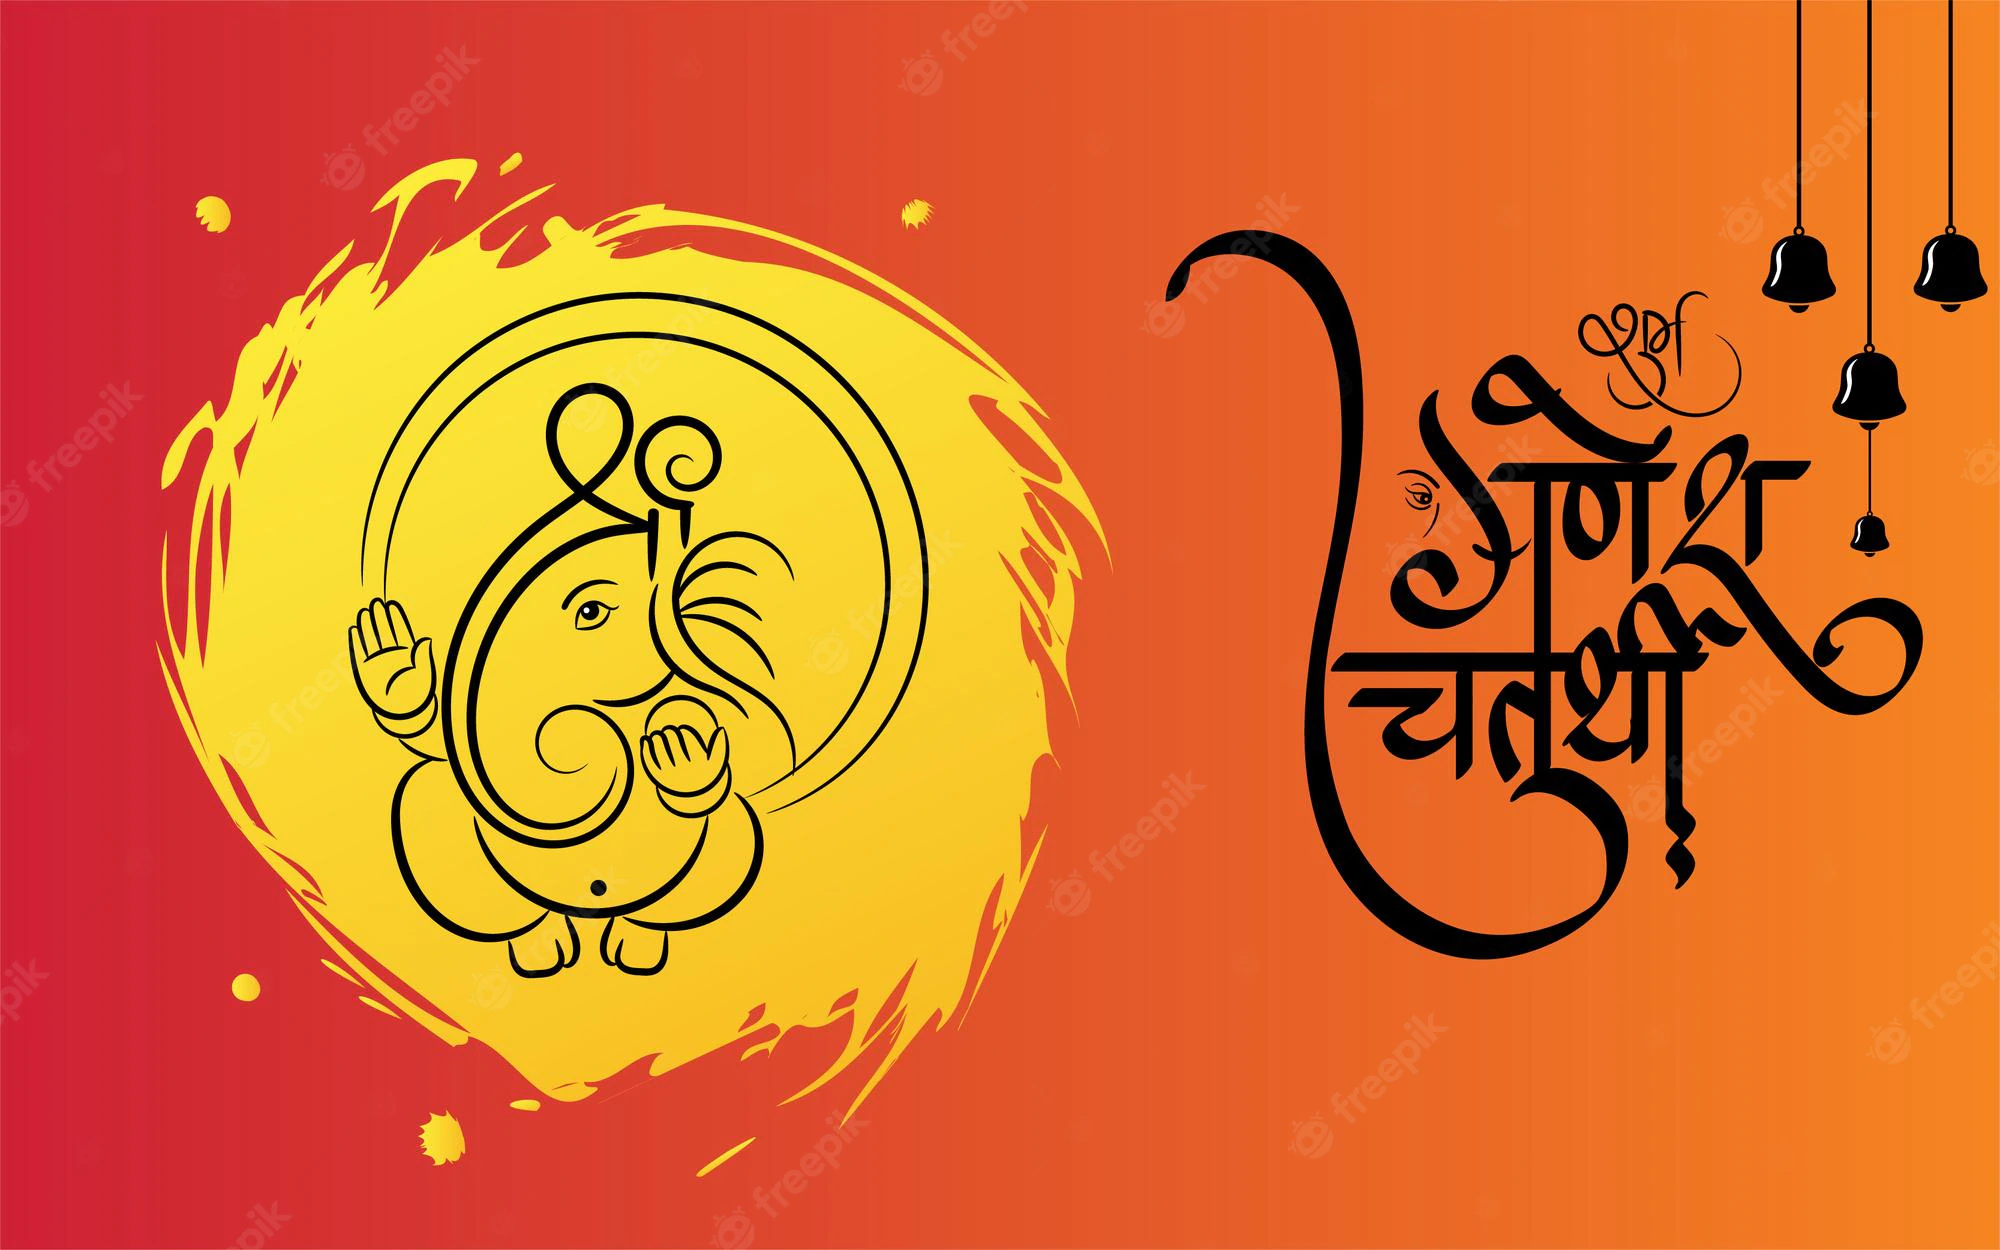 Ganesh Chaturthi 2022: Invitation Card Templates, Messages, Quotes, Wishes, Images, and Greetings